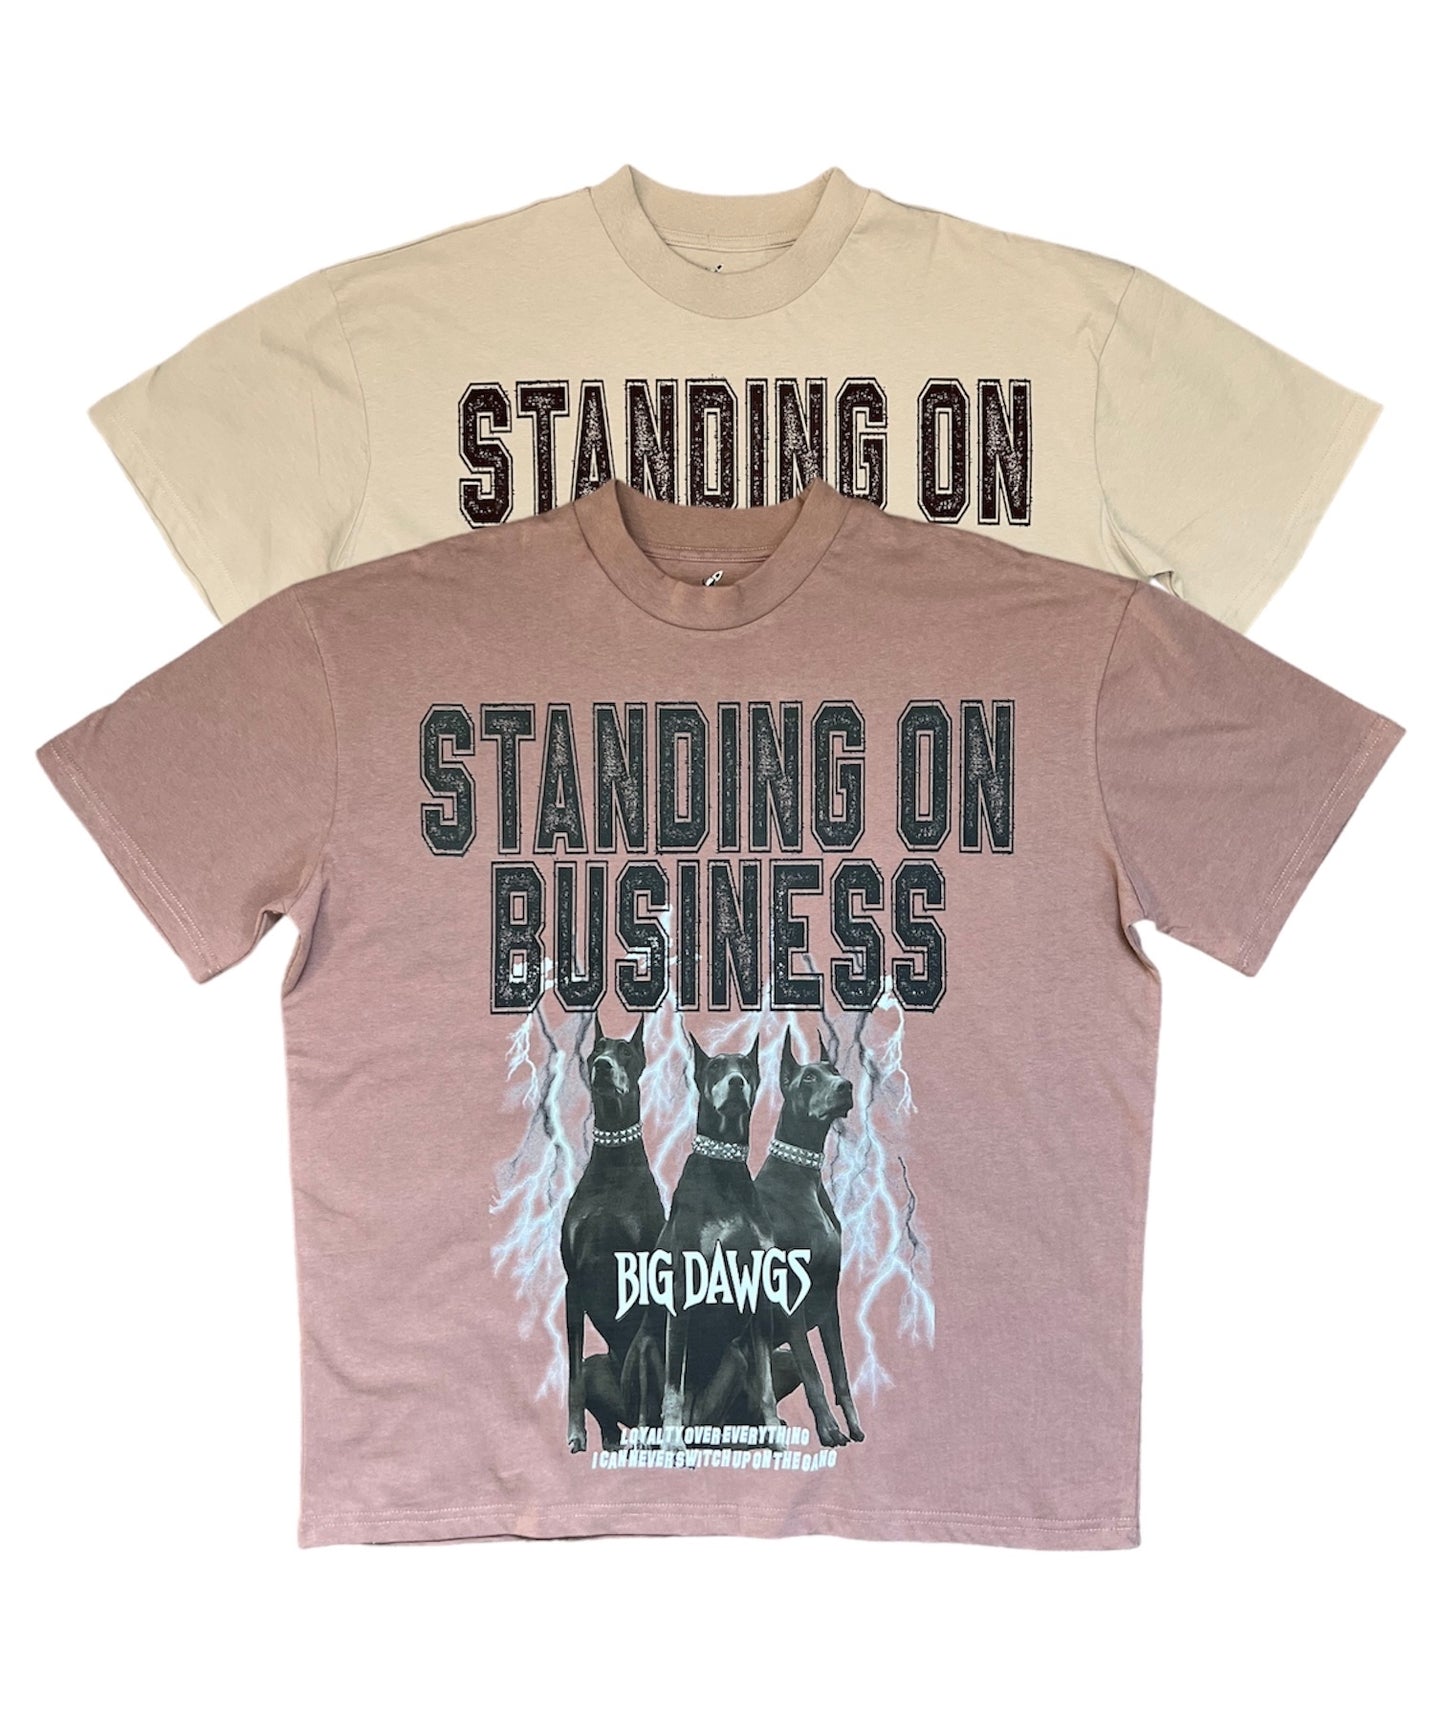 “Standing On Business” Tees